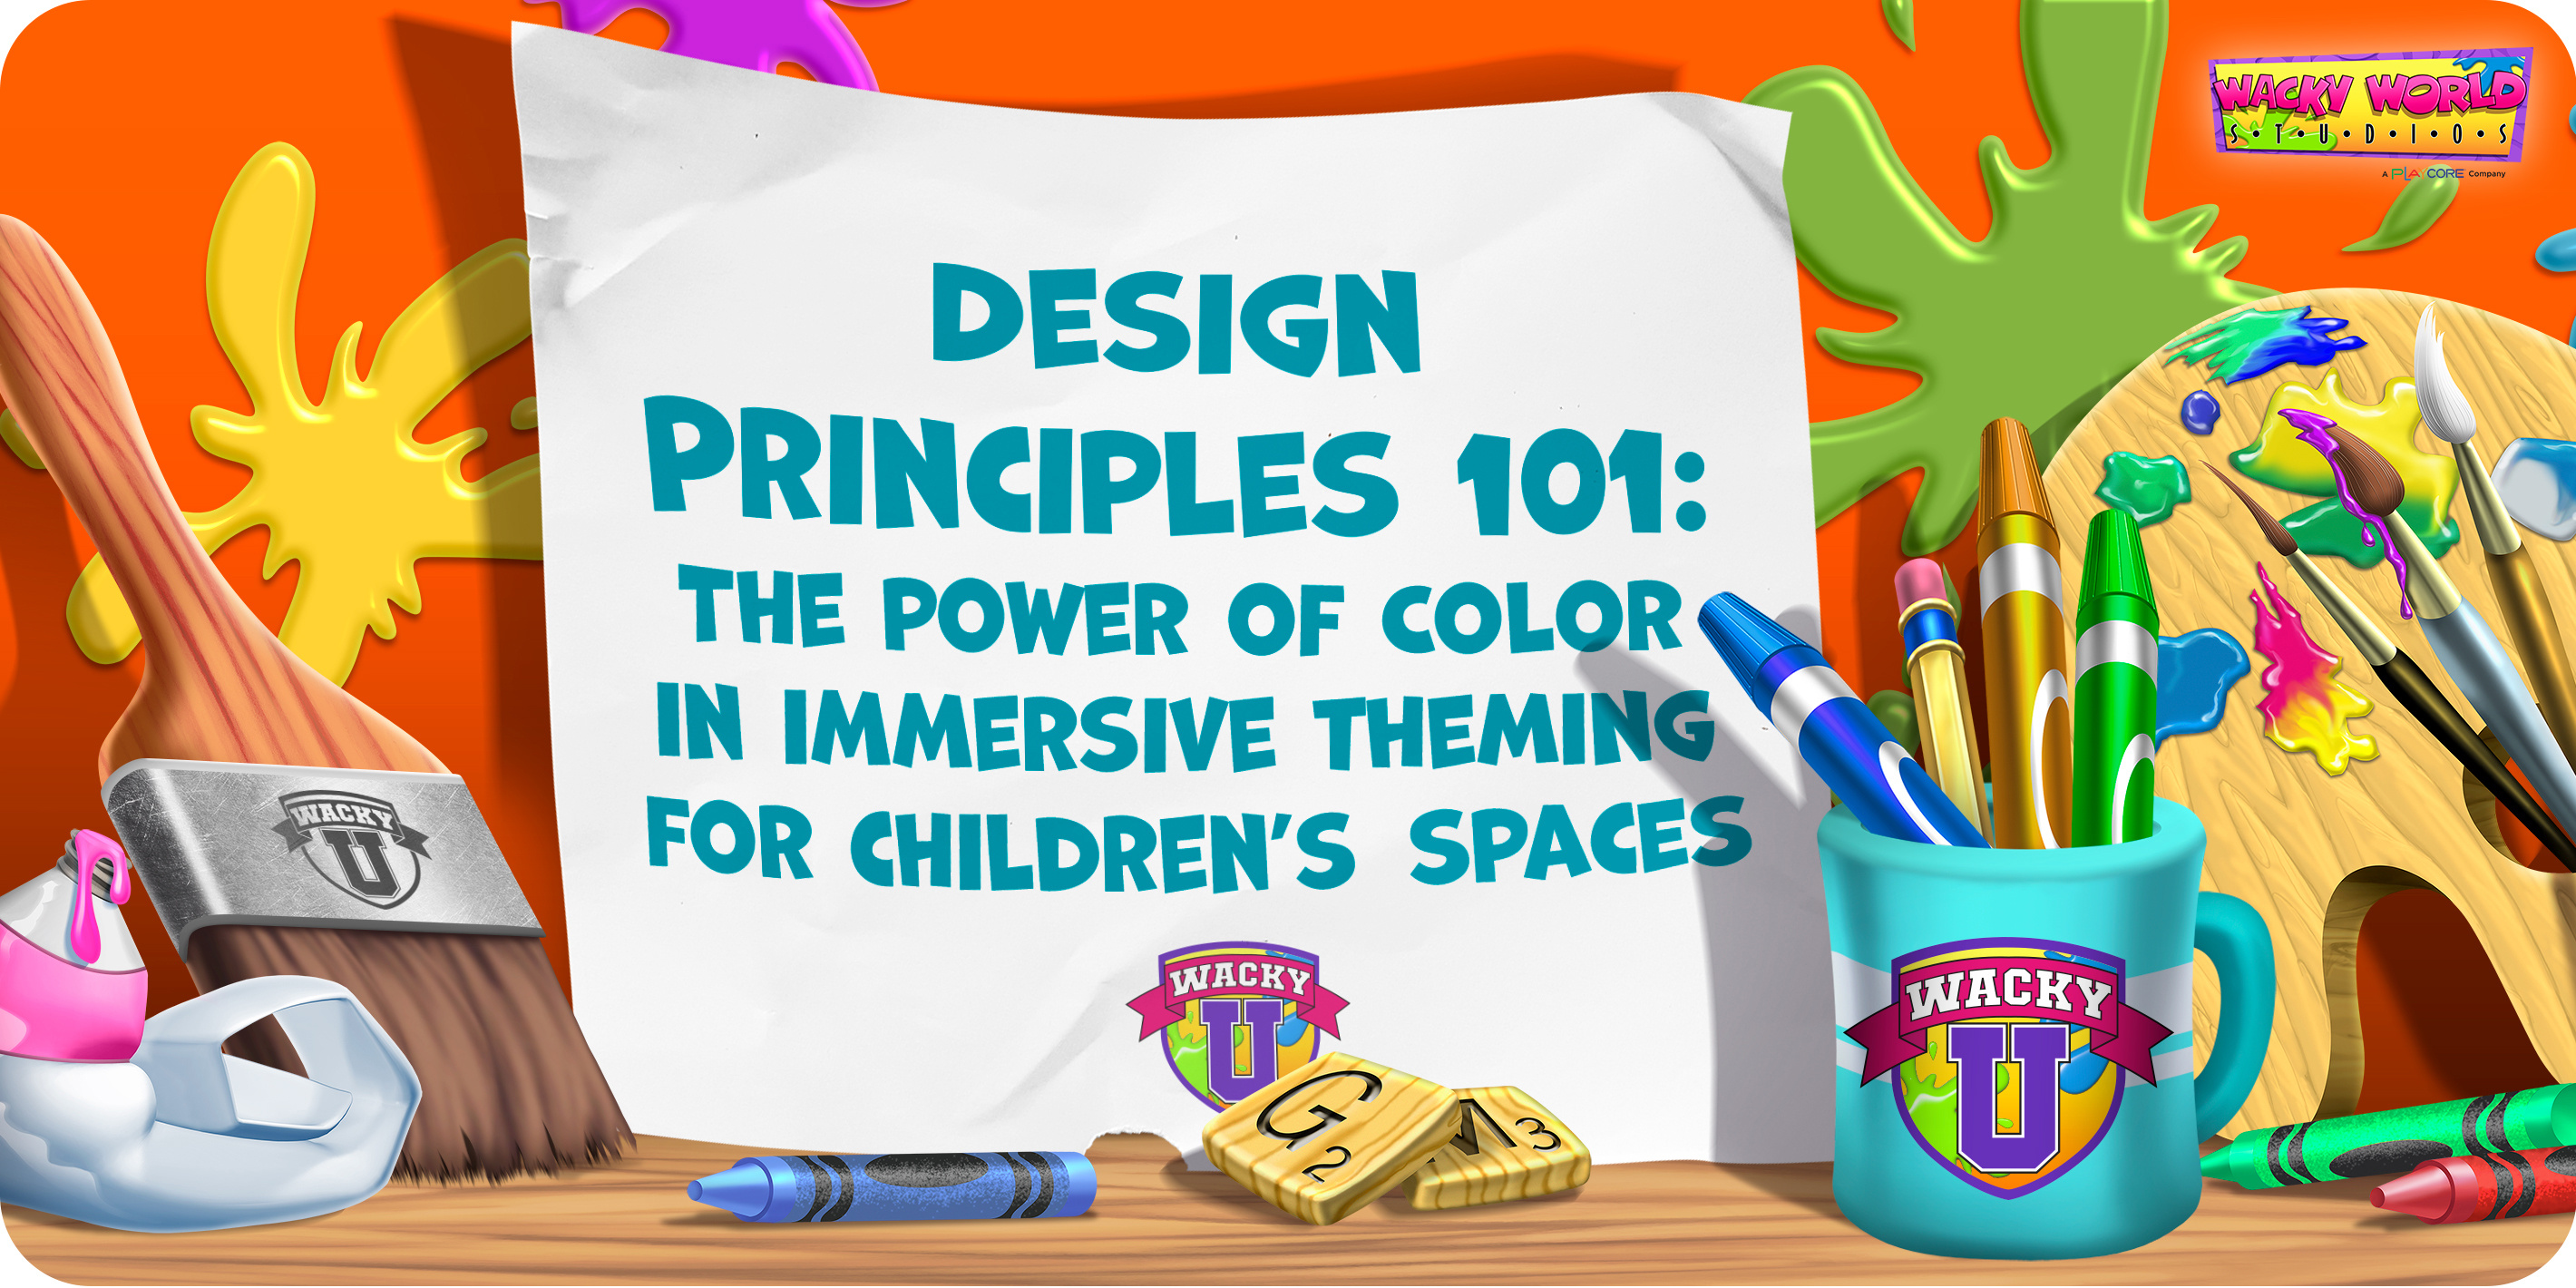 The Power of Color in Immersive theming for Children's Spaces